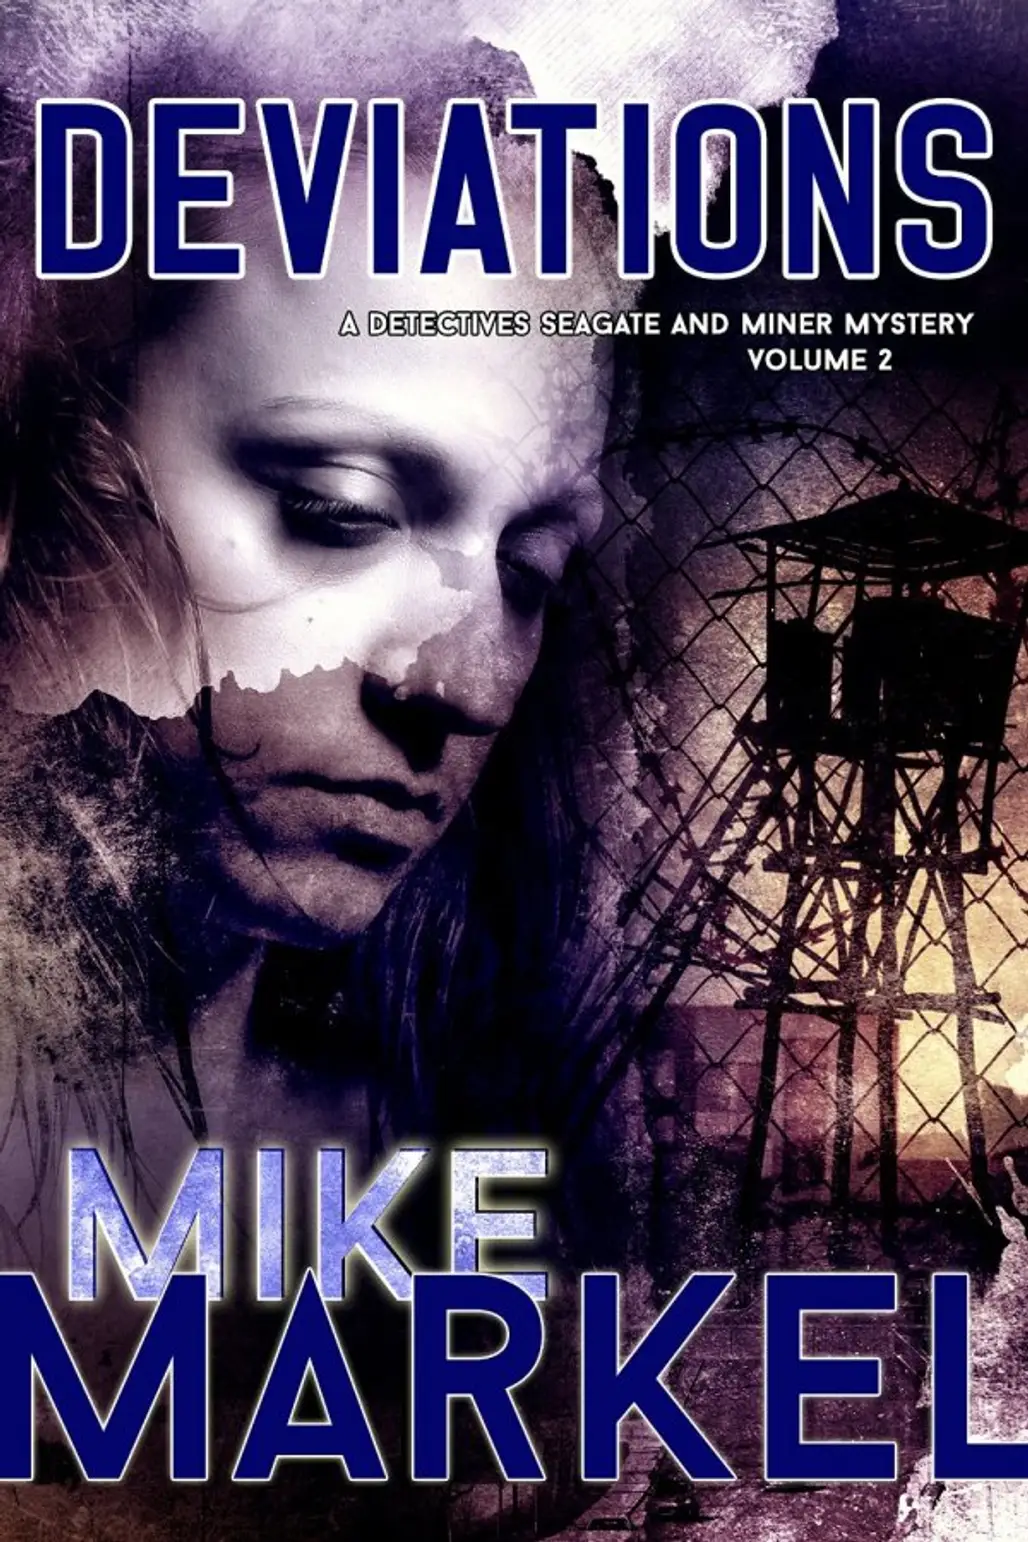 Deviations: a Detectives Seagate and Miner Mystery by Mike Markel